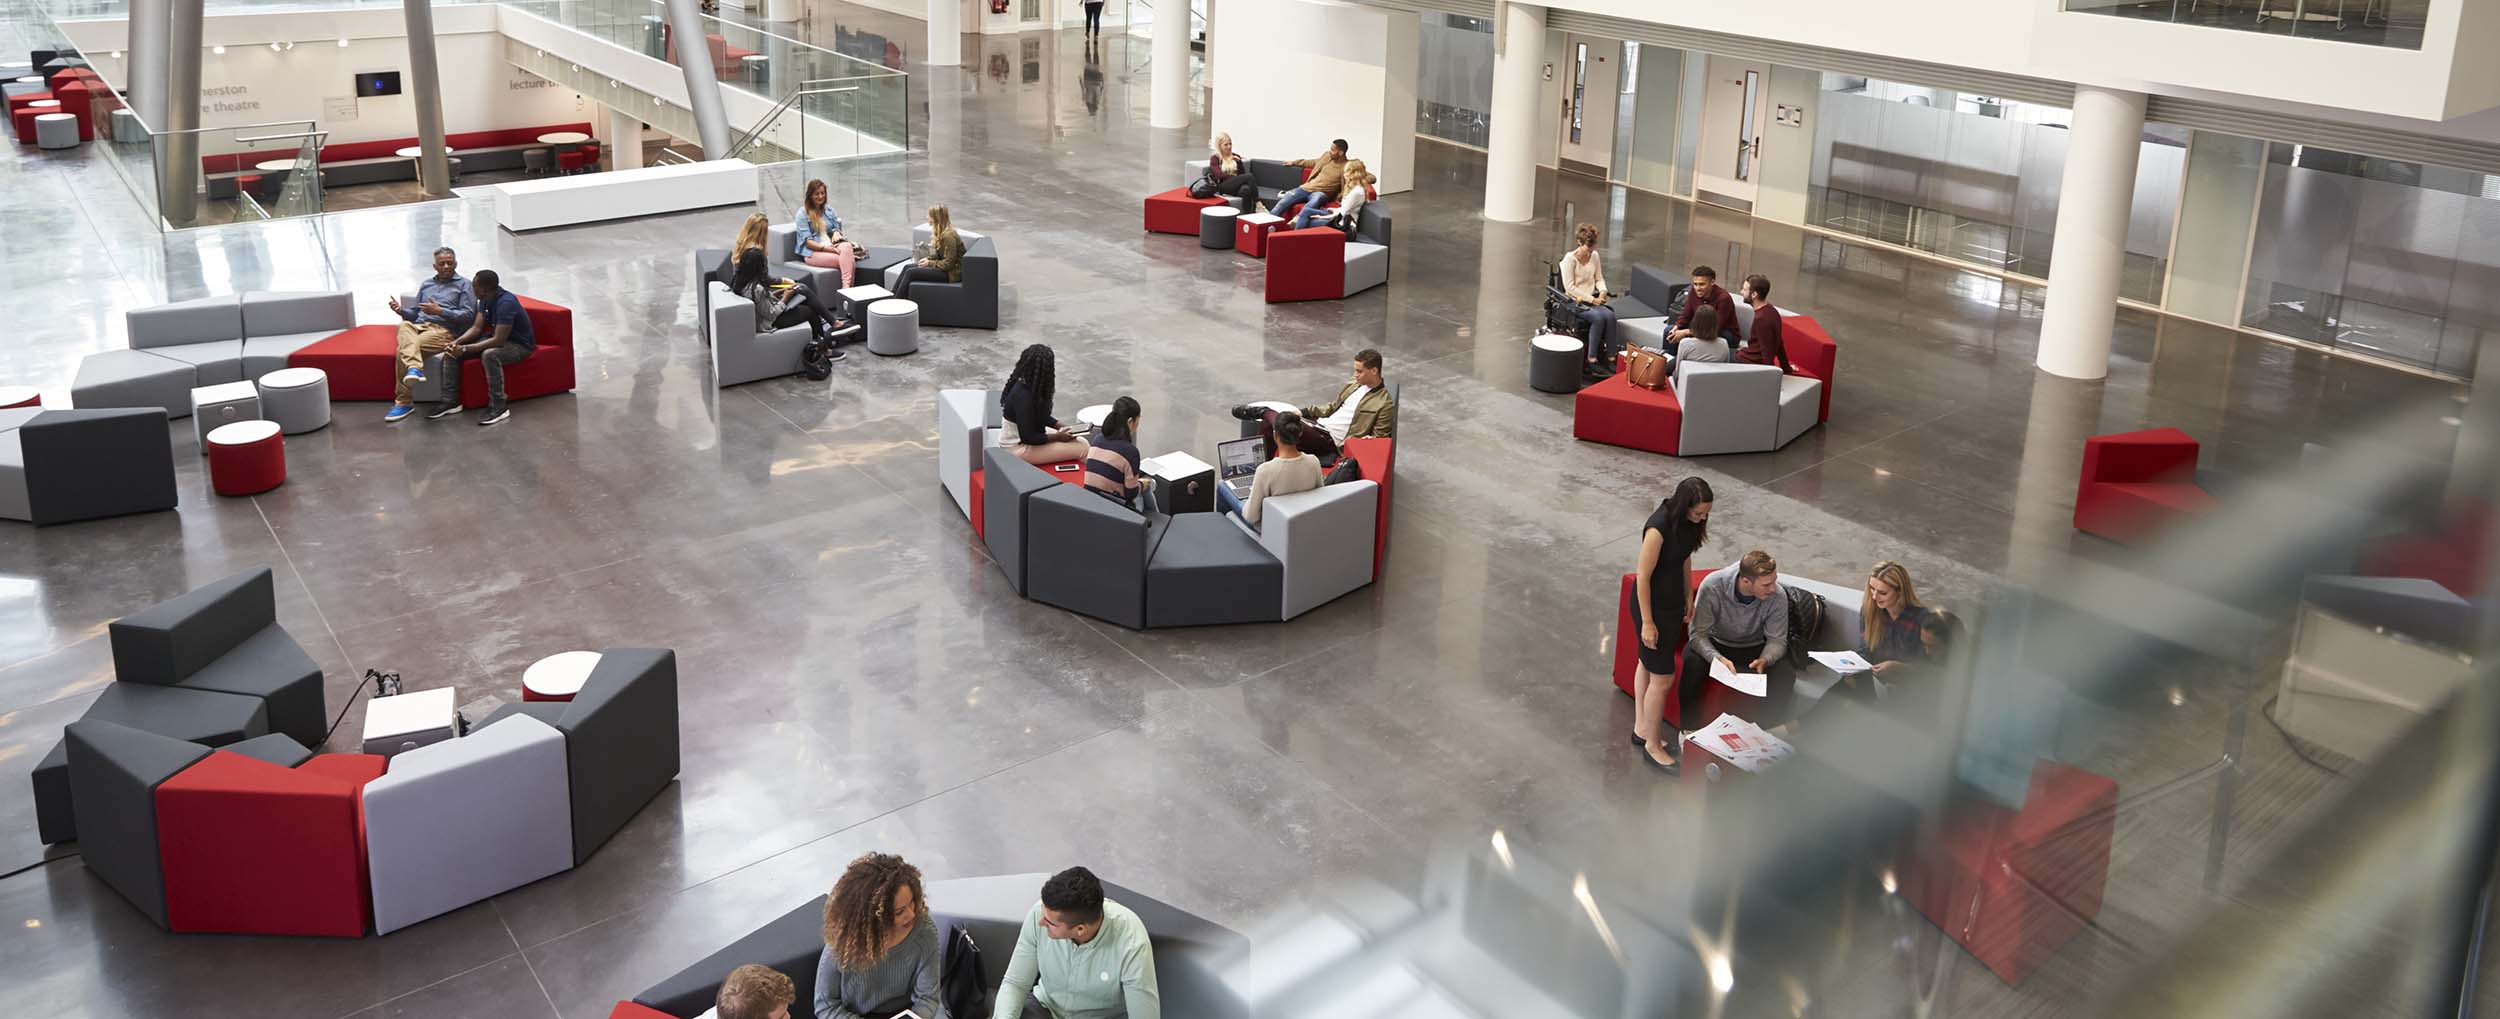 Students sat on sofas in The Spark atrium